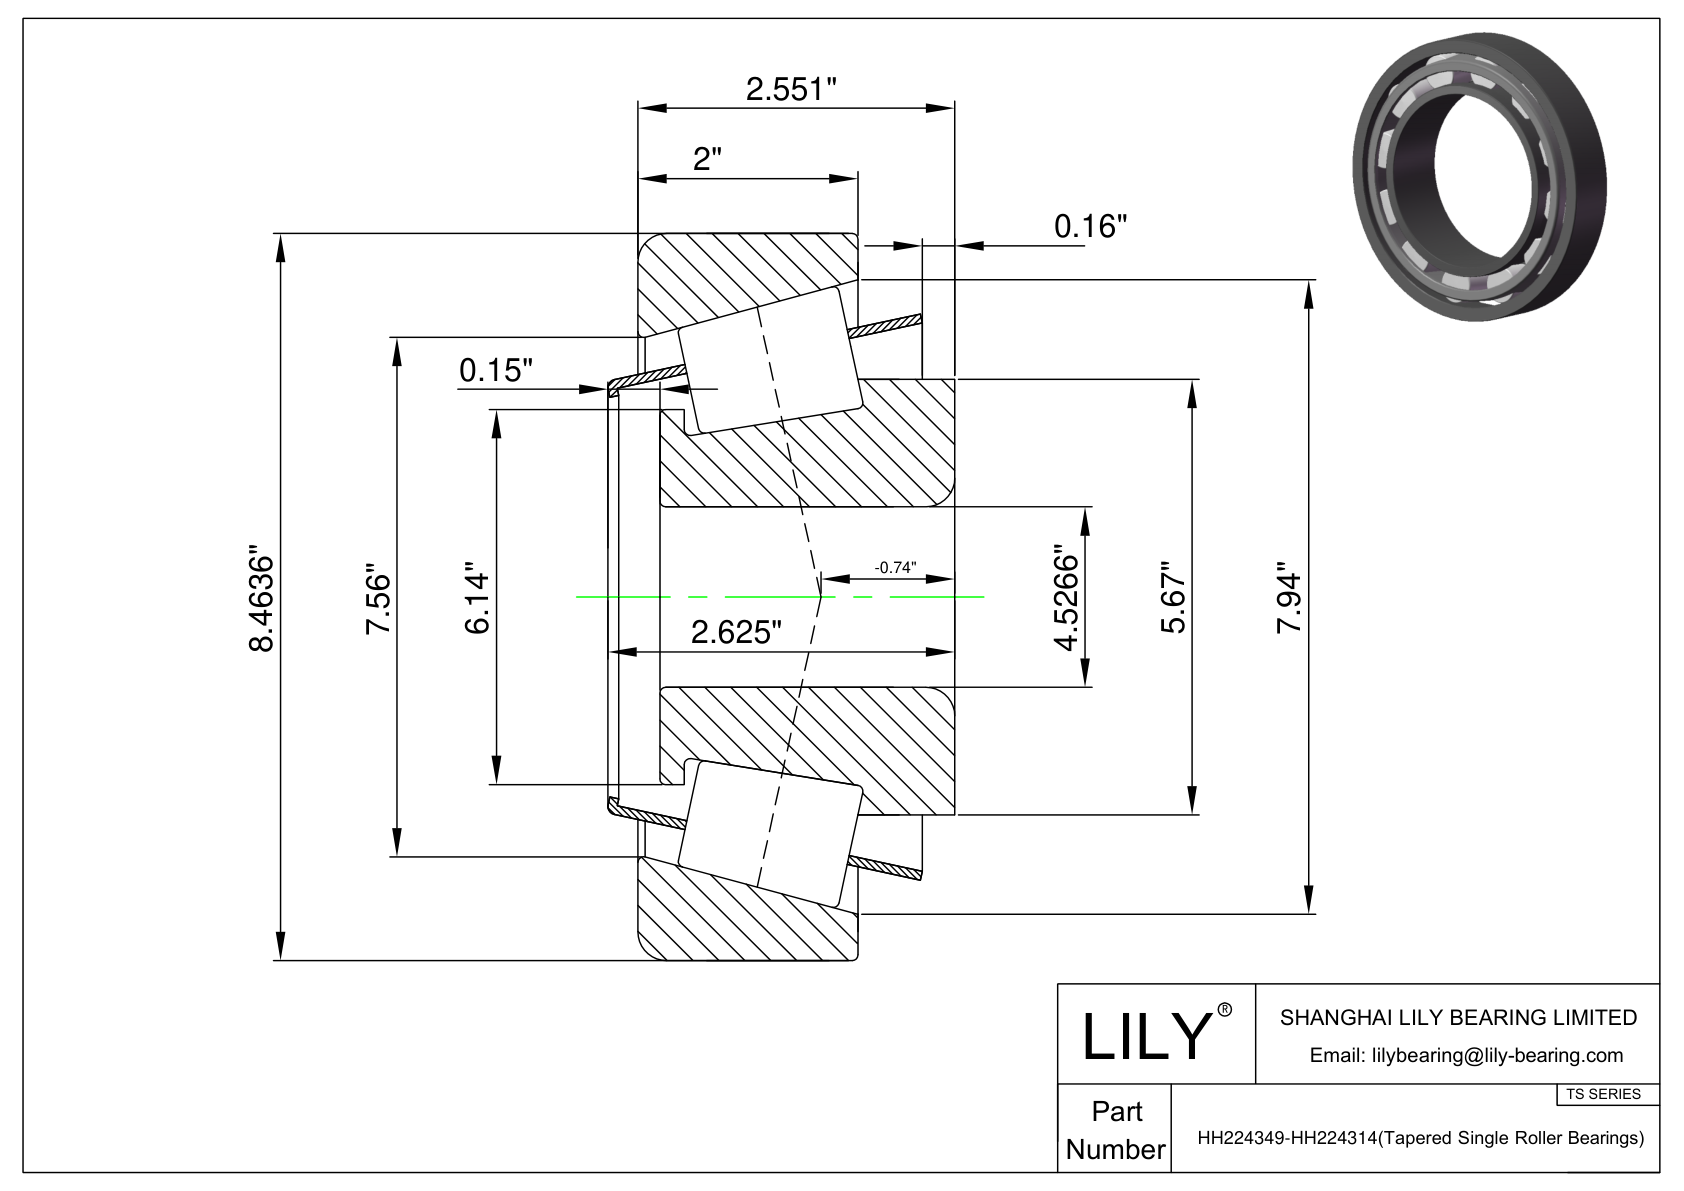 HH224349-HH224314 TS (Tapered Single Roller Bearings) (Imperial) cad drawing